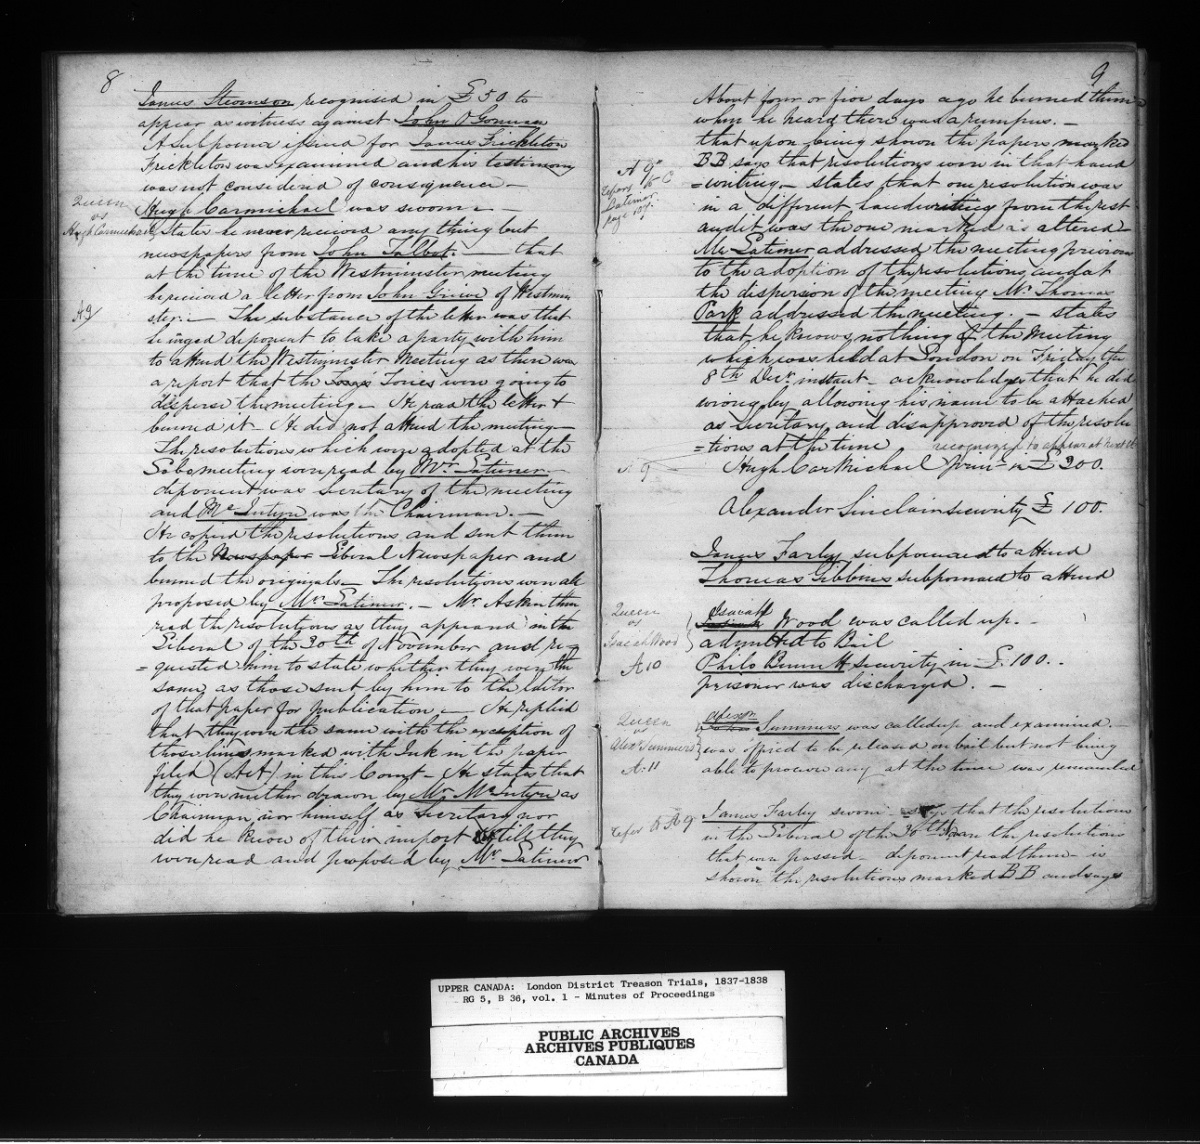 Page spread of nineteenth century written records about Upper Canada rebellion, downloaded from Canadiana website.